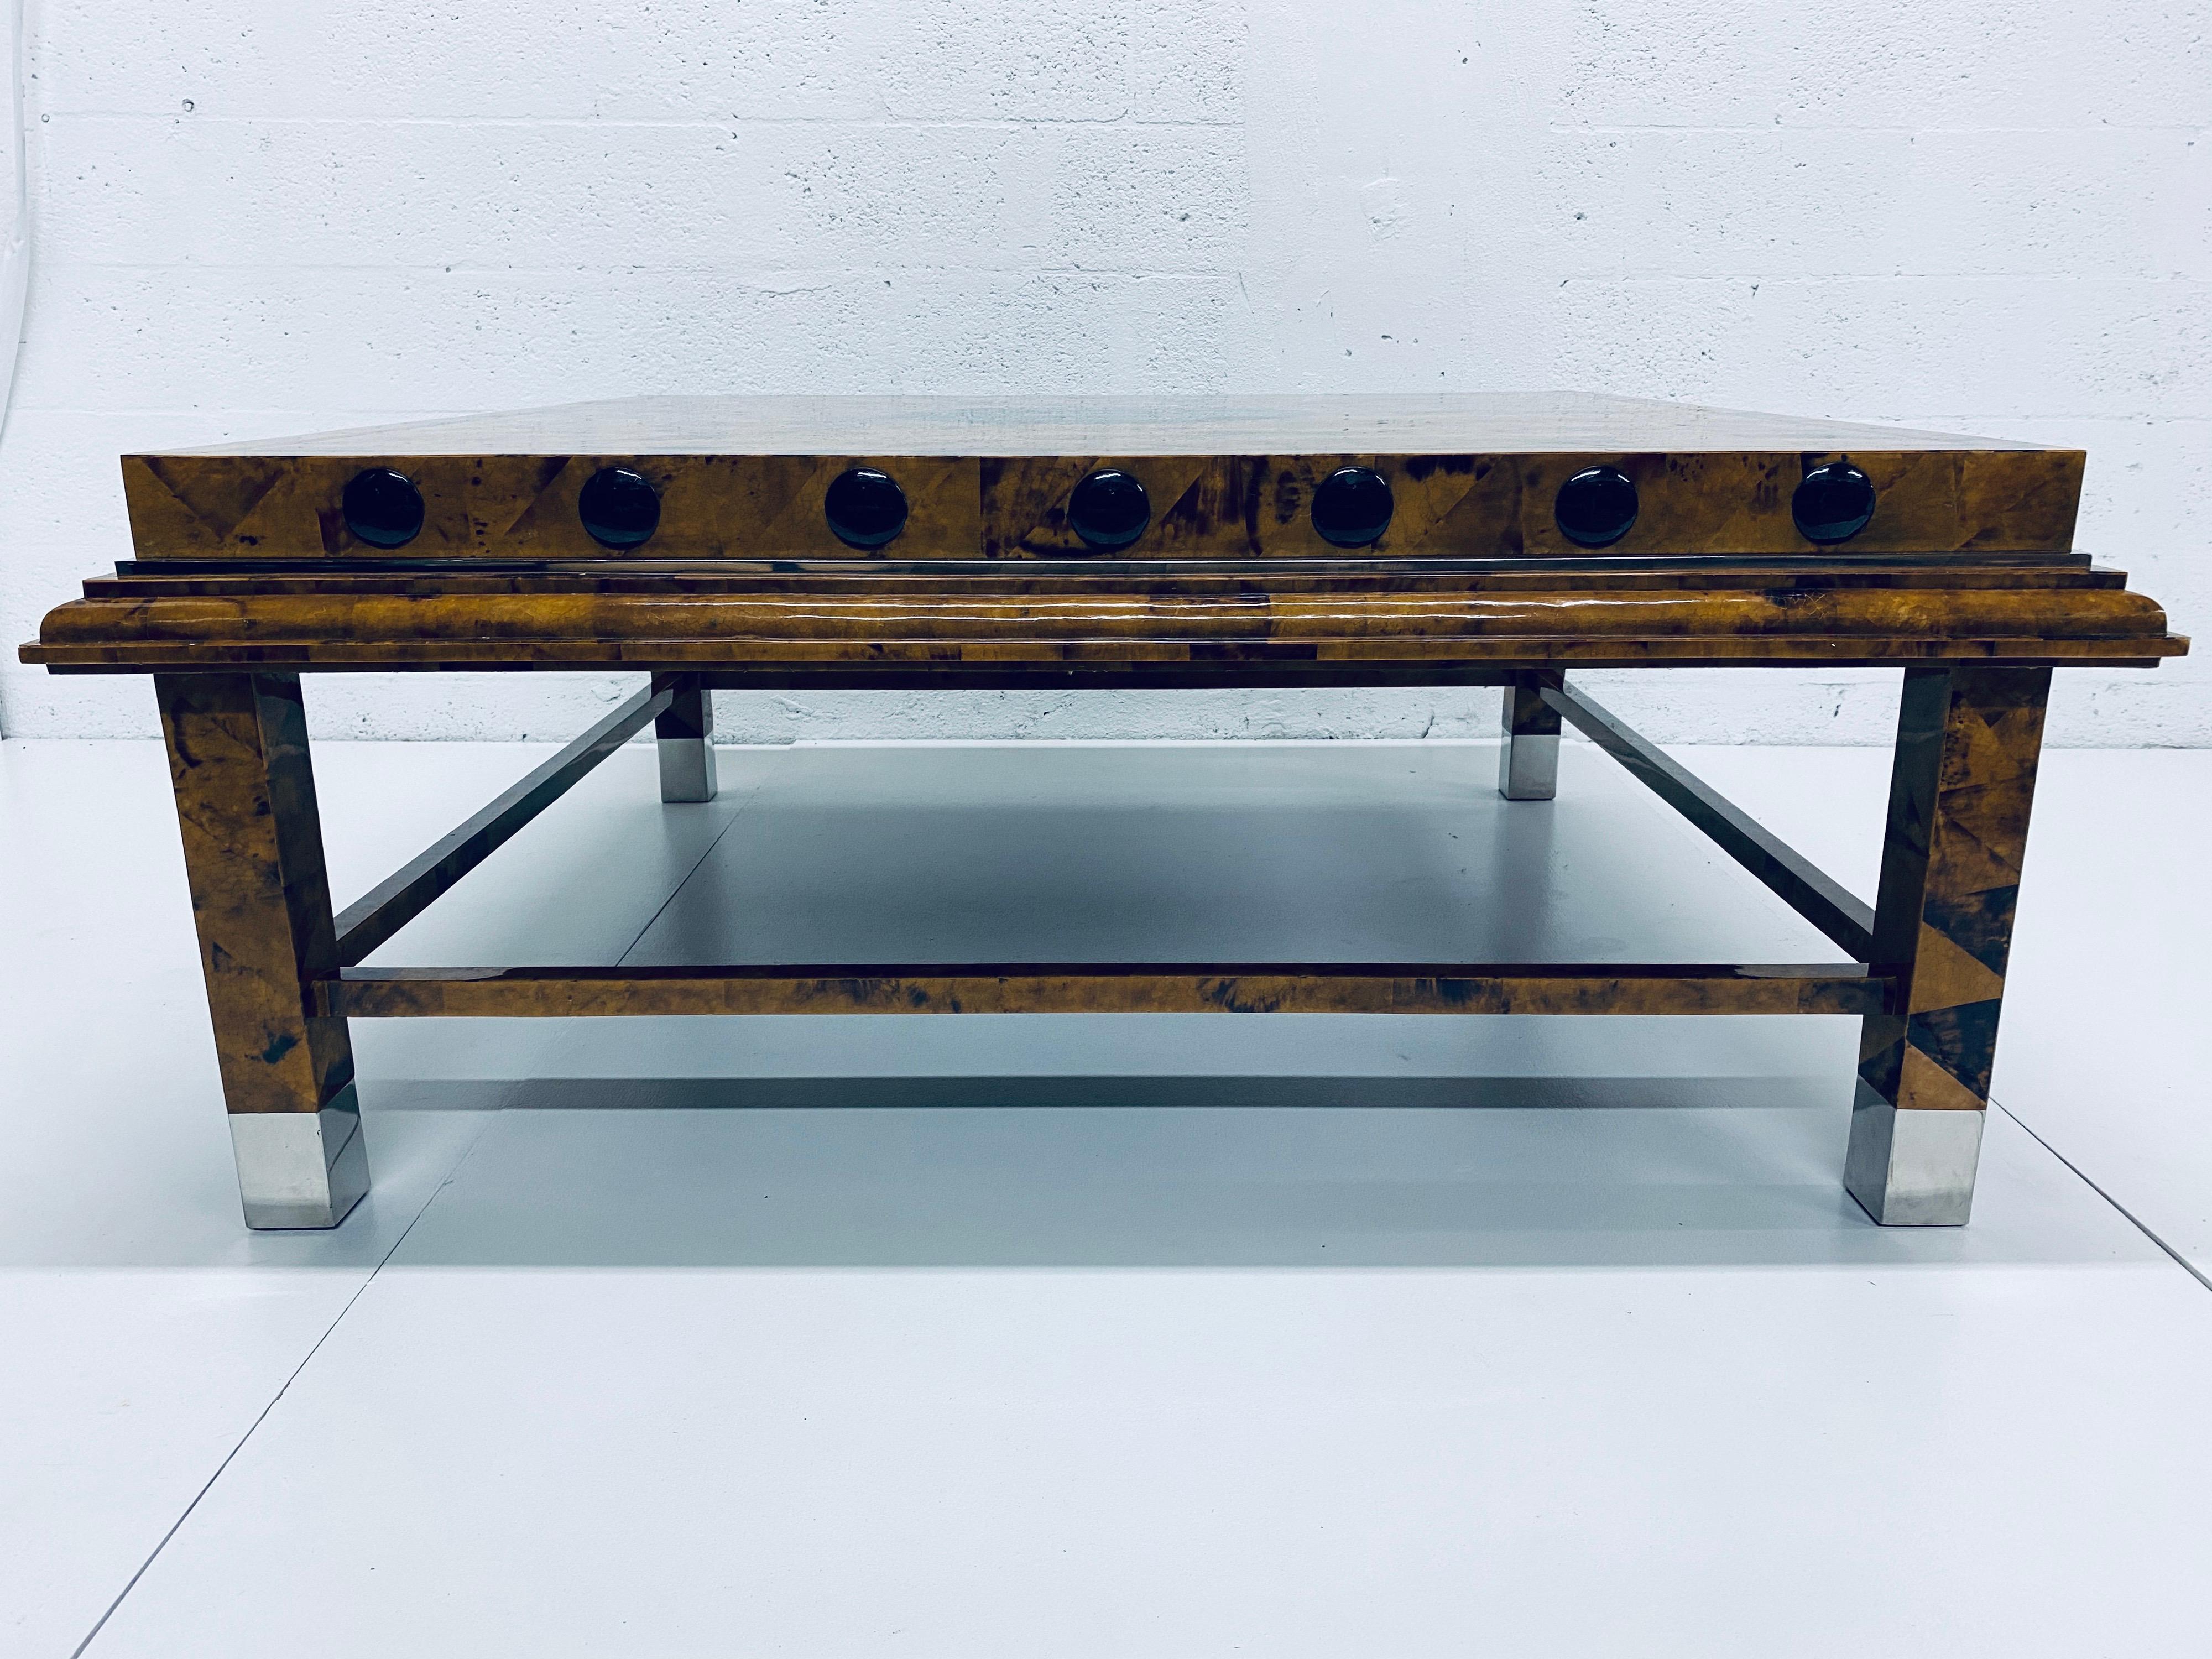 Monolithic tessellated cracked coconut shell coffee table by Maitland-Smith from the 1970s. The table is wrapped with a band of polished chrome and the feet are also wrapped in polished chrome. Exquisite, one-of-kind piece. We understand this piece